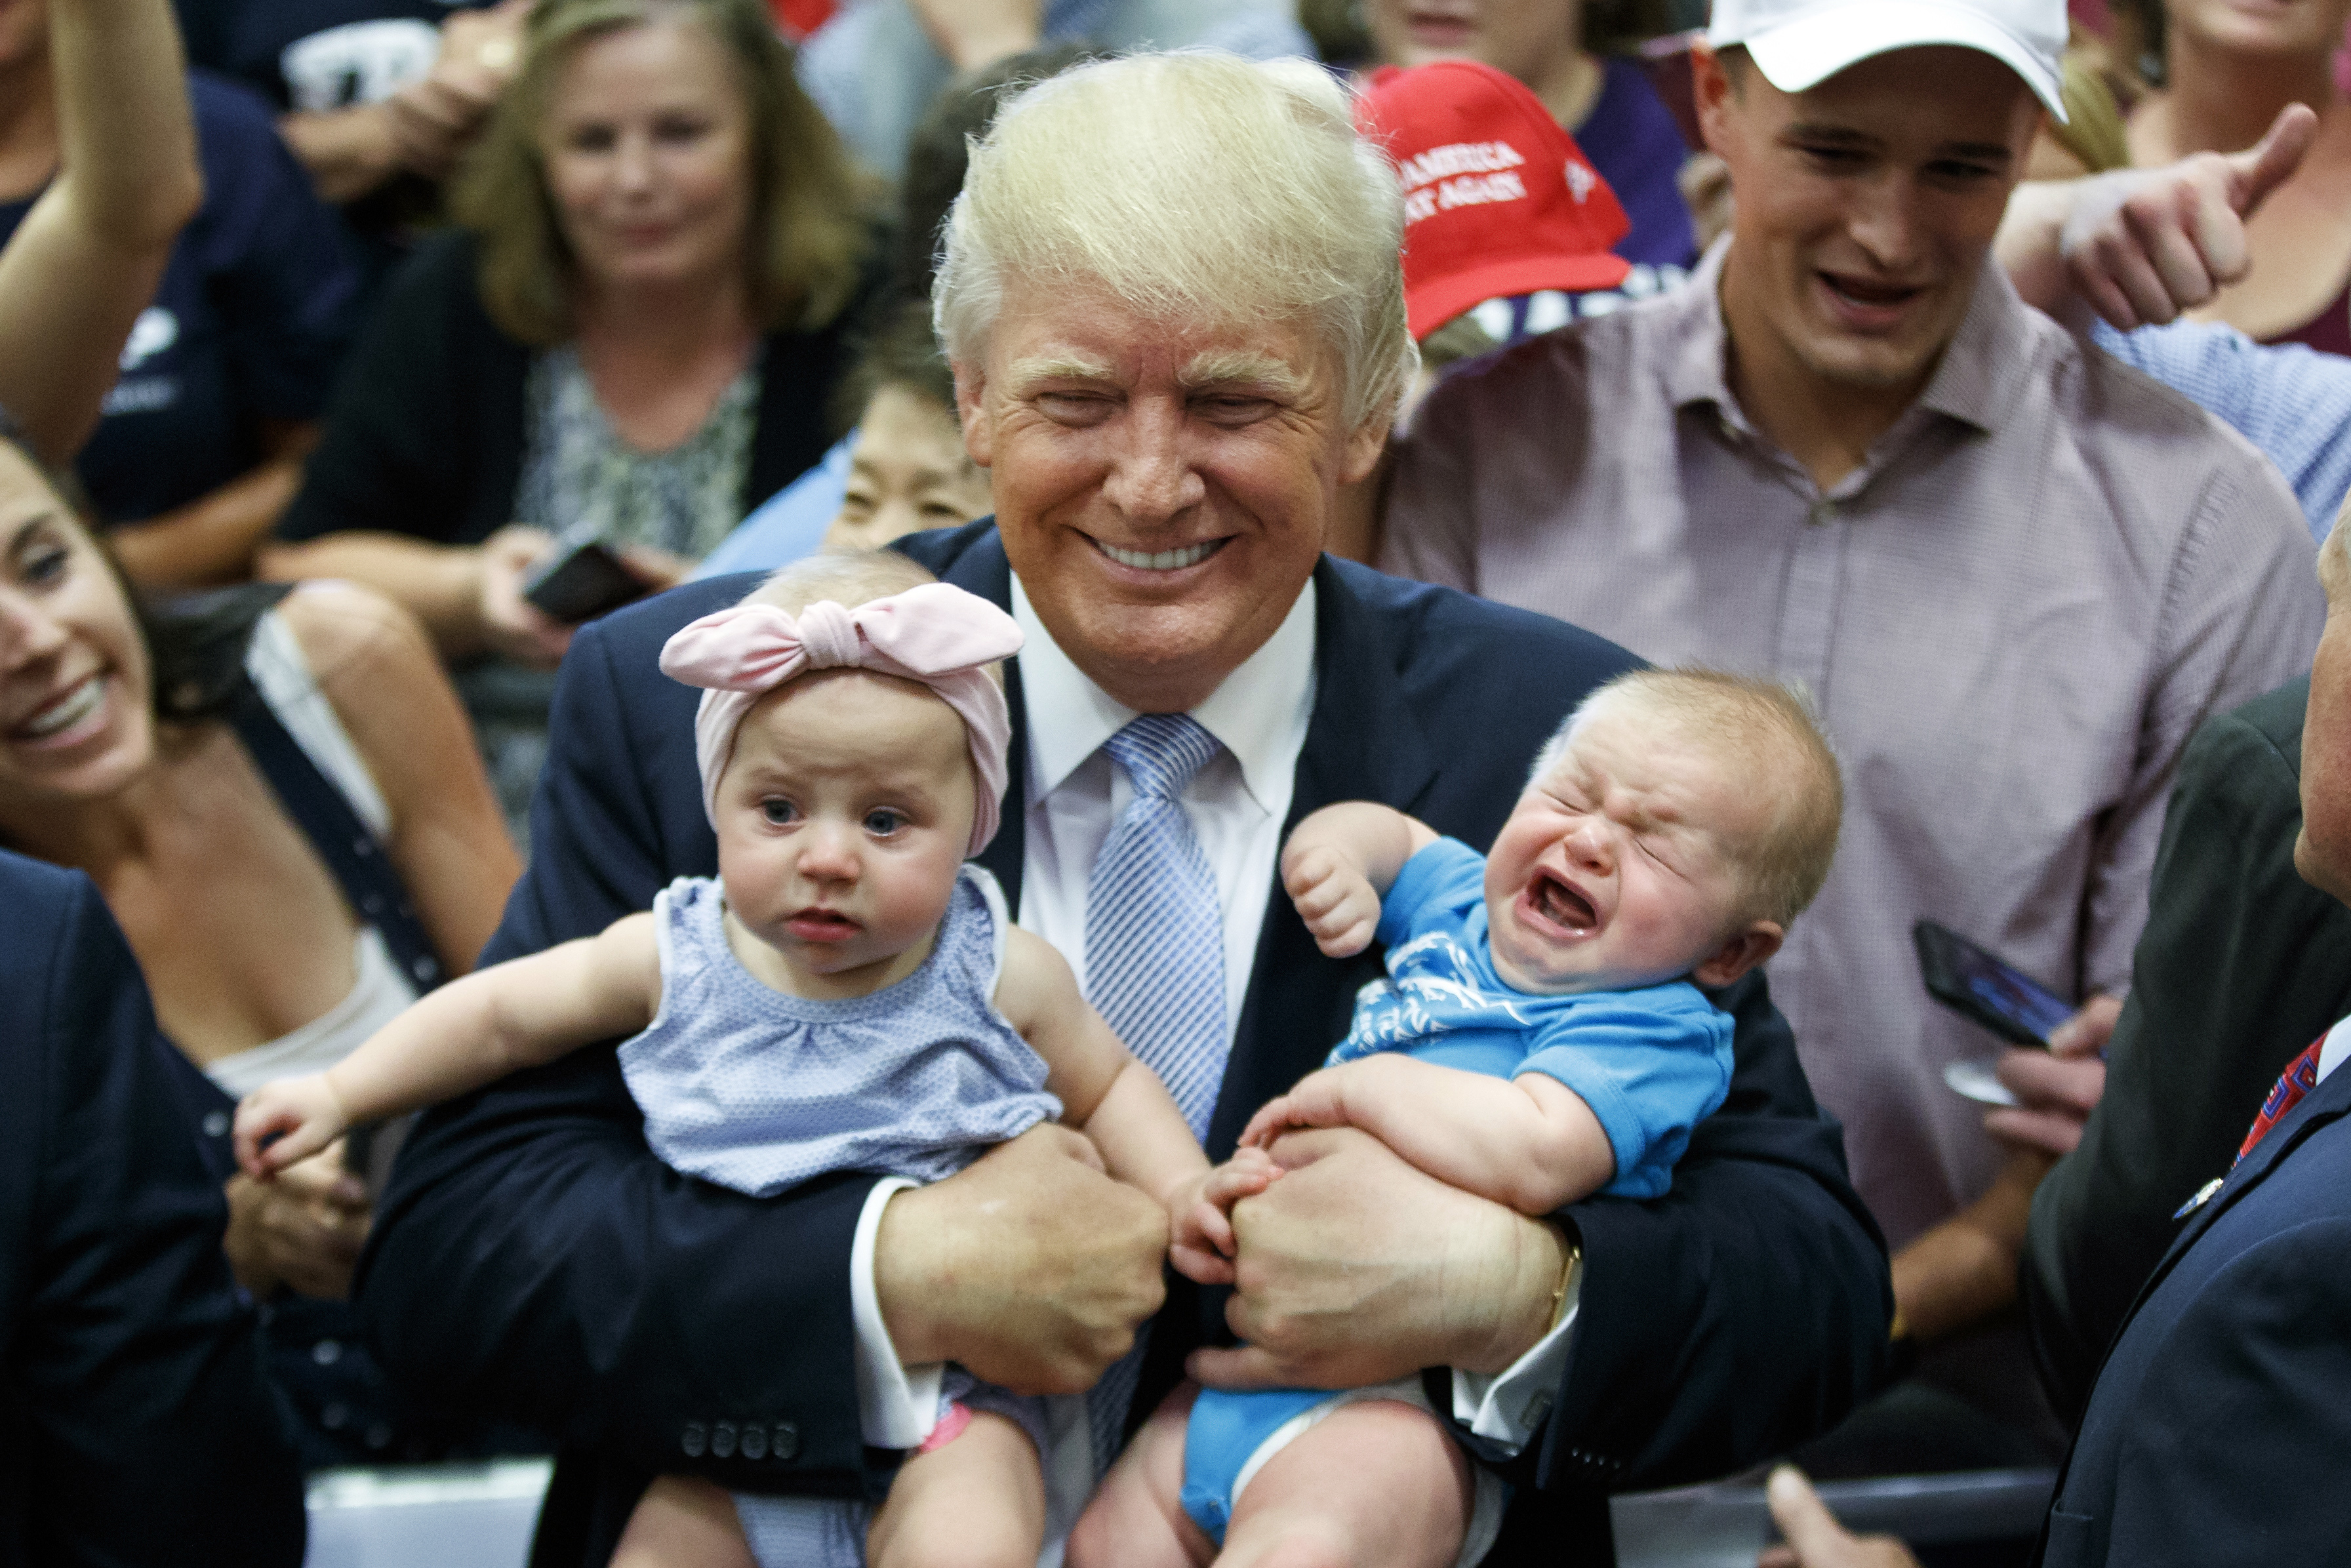 Republican presidential candidate Donald Trump holds a pair of babies as he works the rope line during a campaign rally, July 29, 2016, in Colorado Springs, Colo.